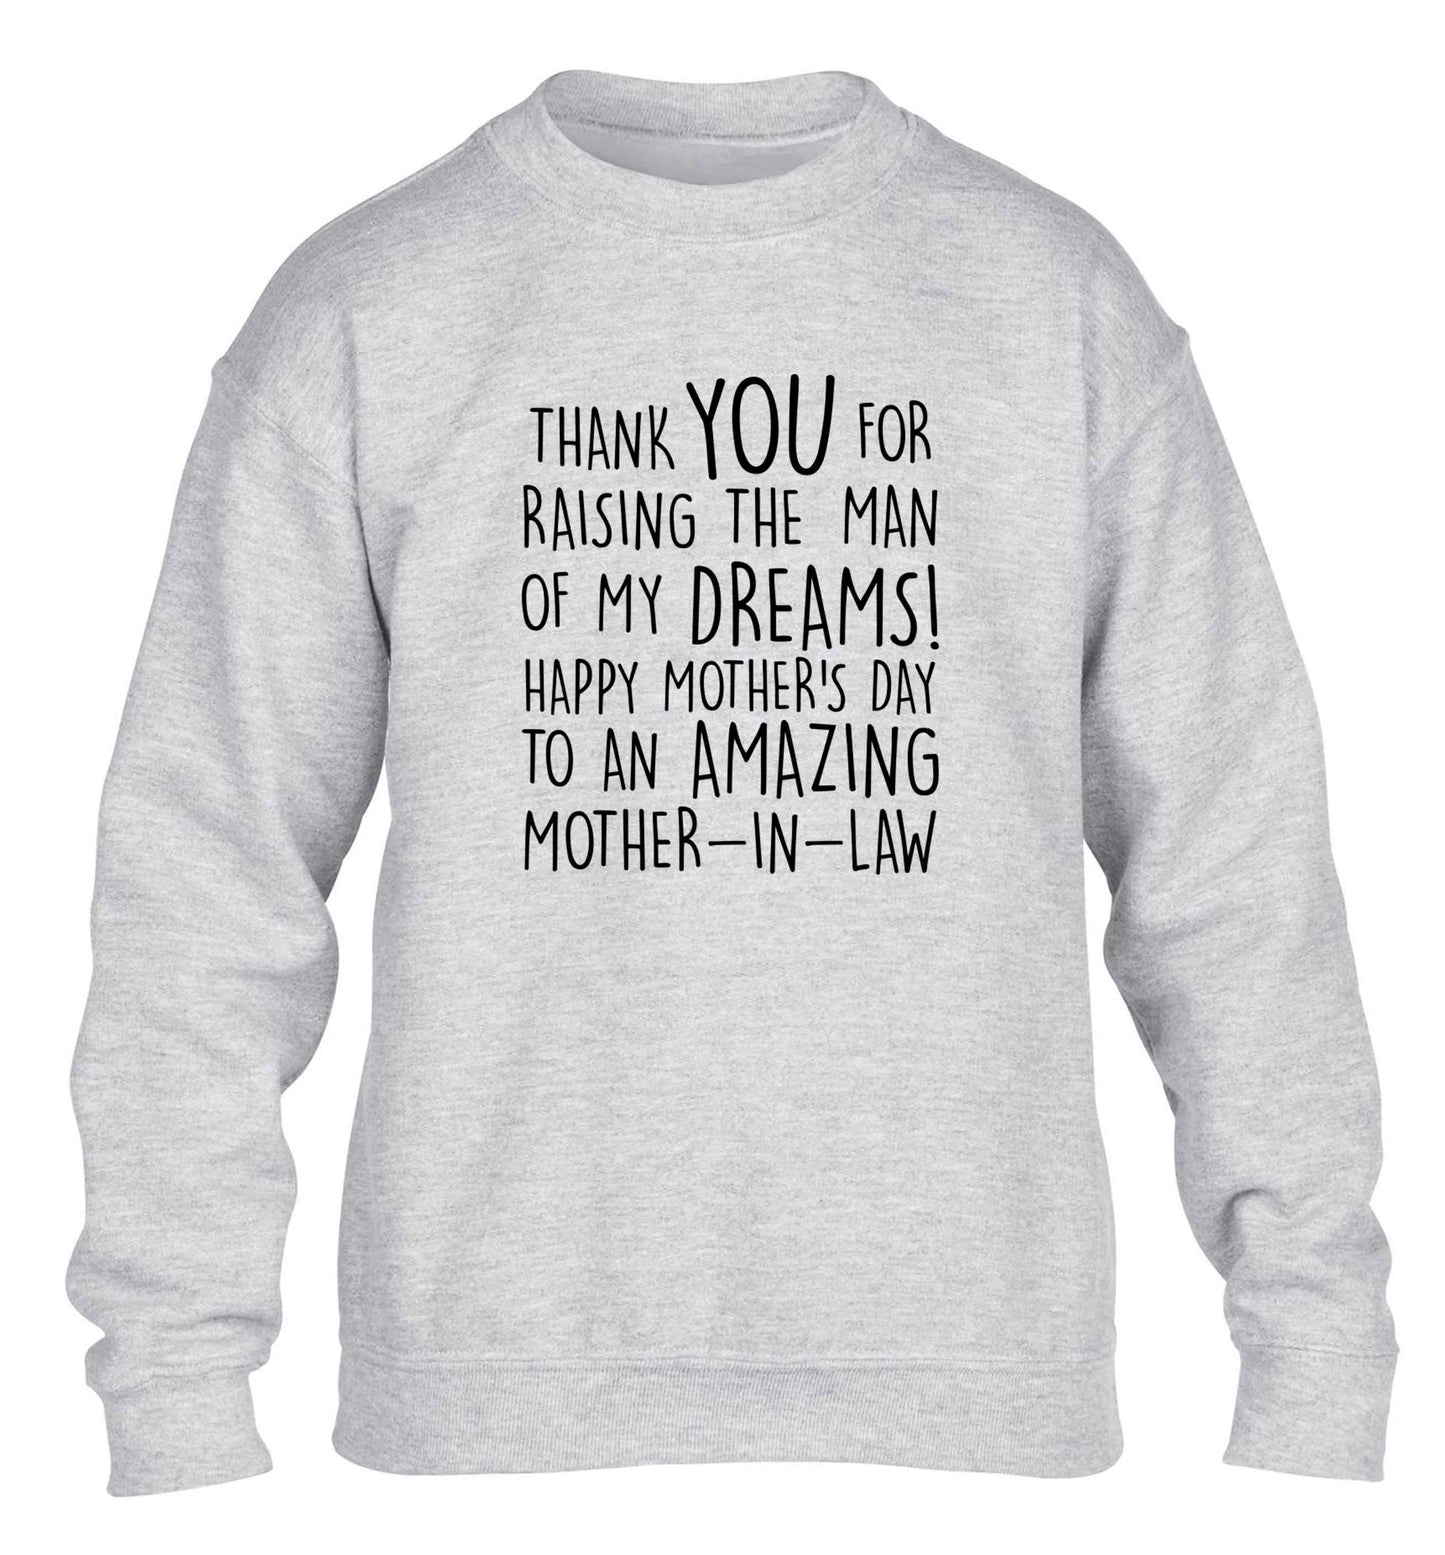 Raising the man of my dreams mother's day mother-in-law children's grey sweater 12-13 Years